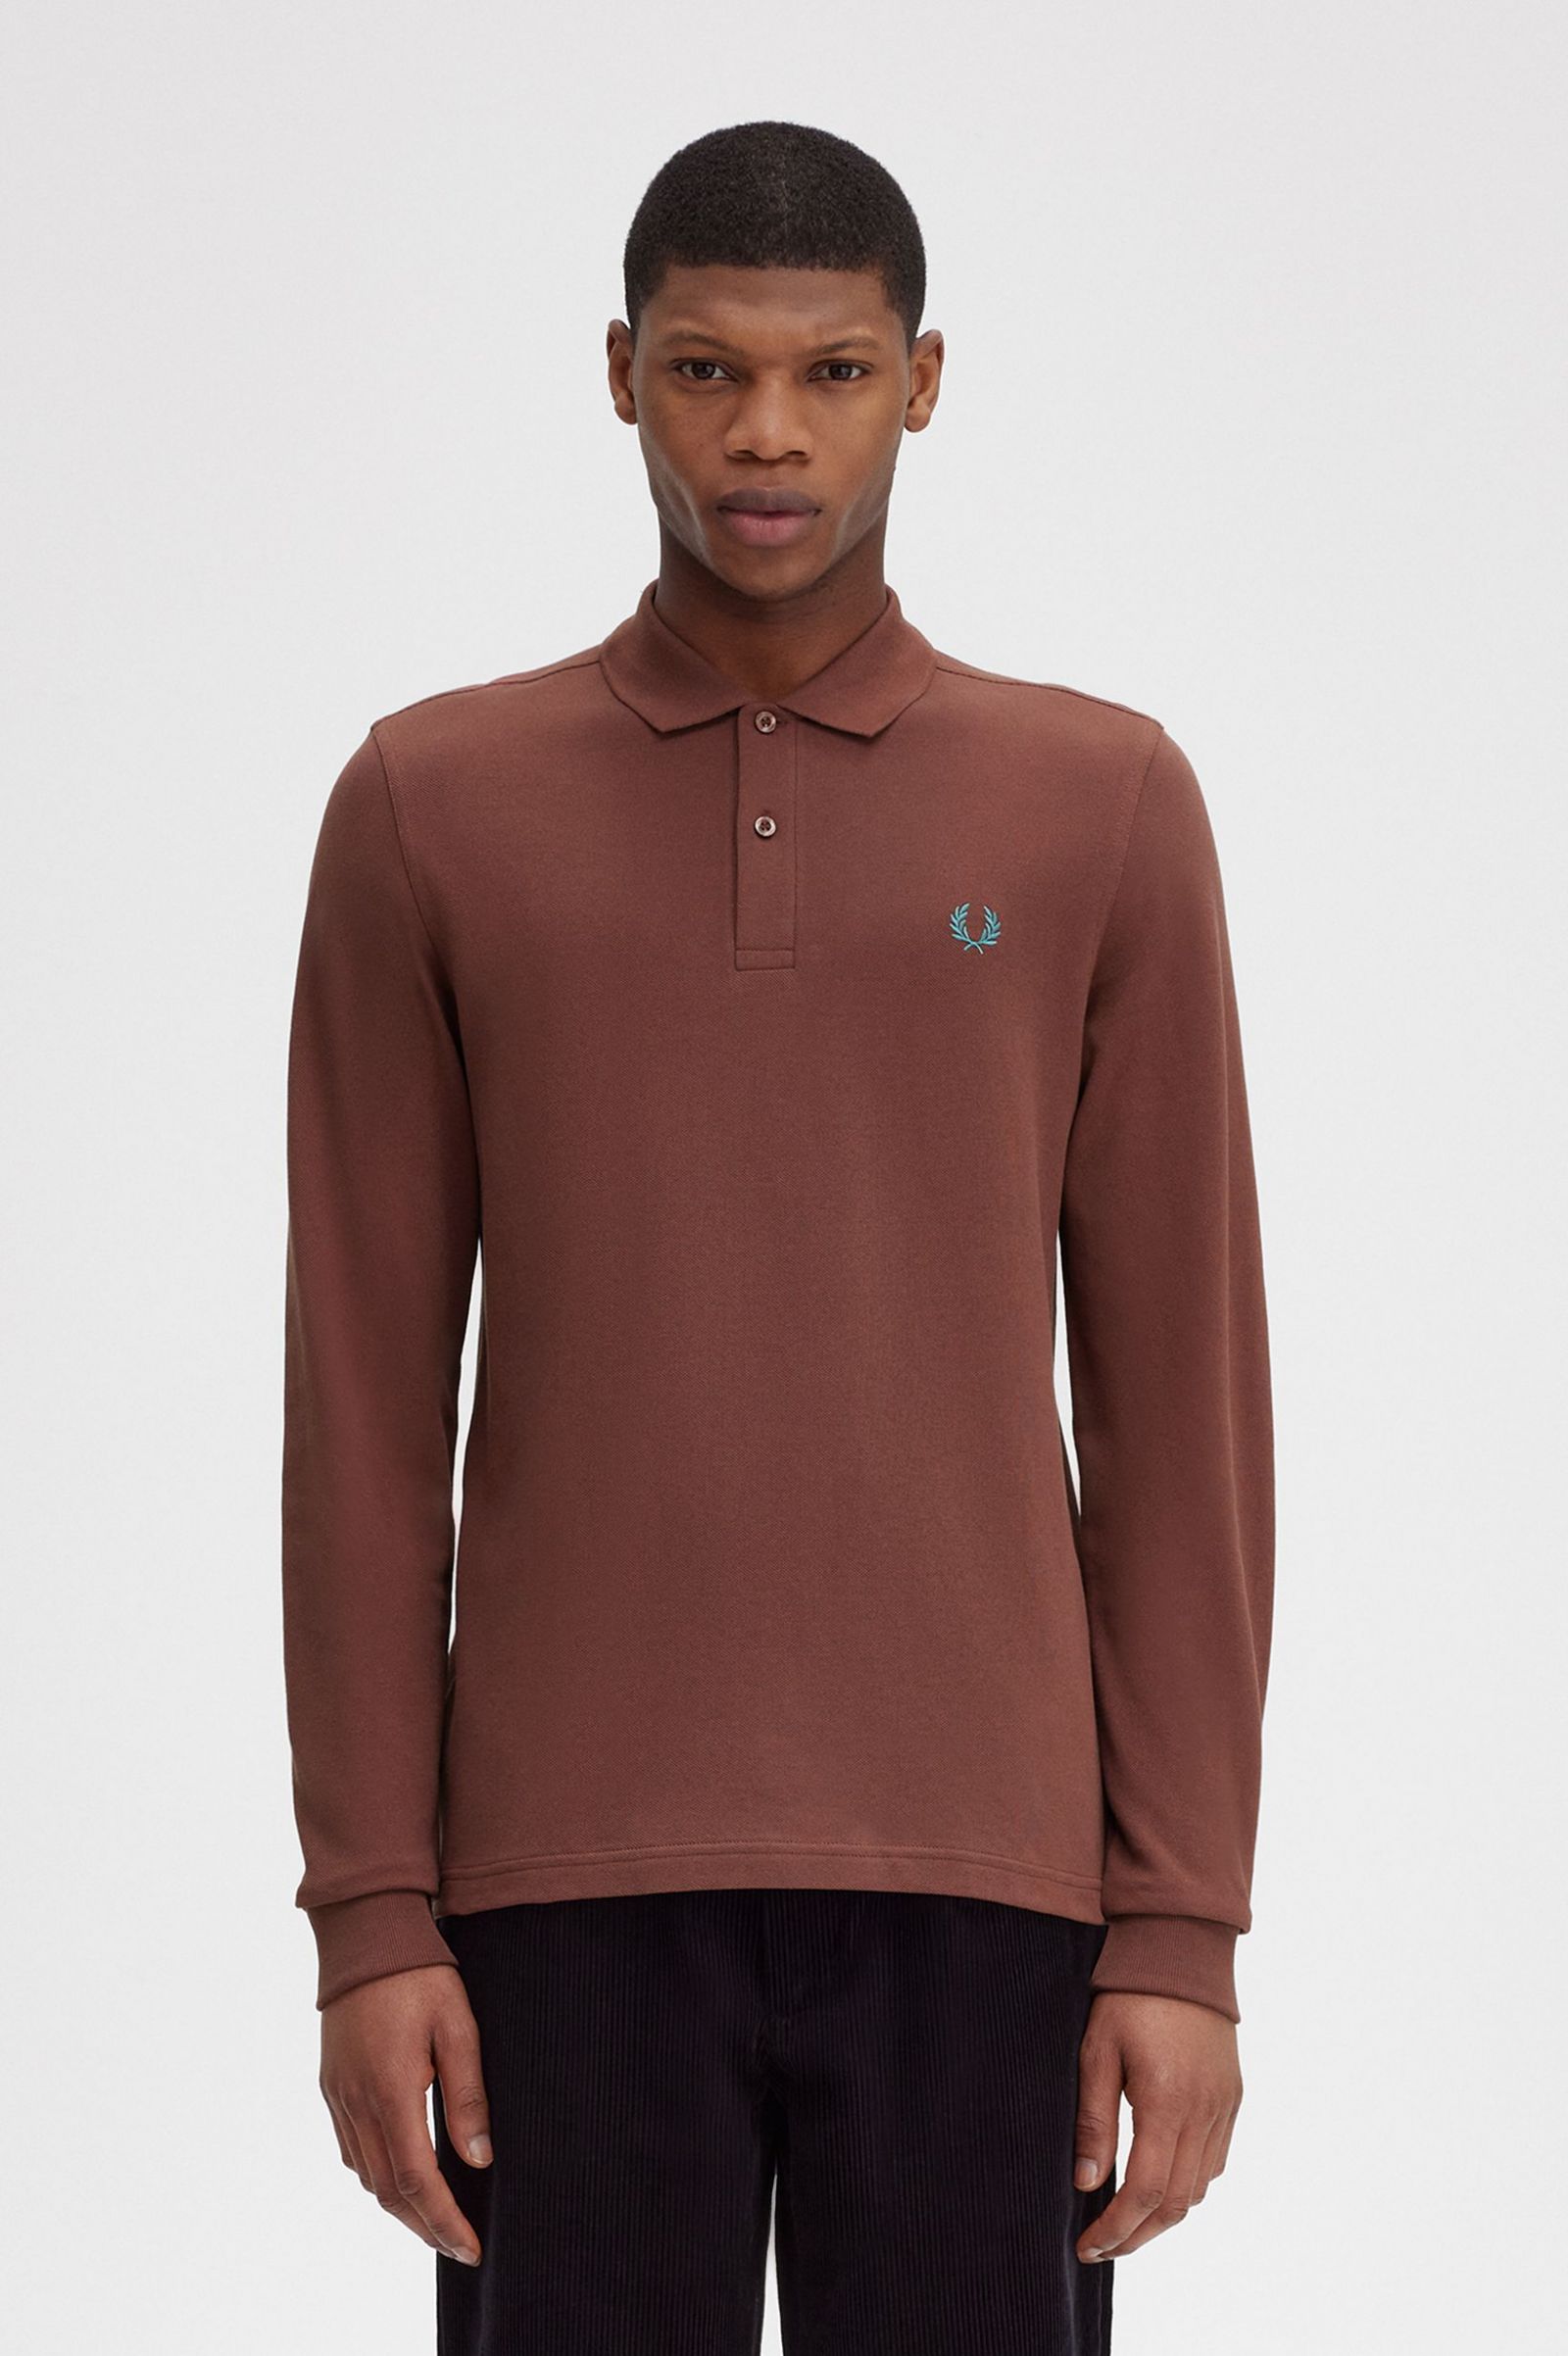 M6006 - Marrón whisky / Verde menta intenso | The Fred Perry Shirt ...